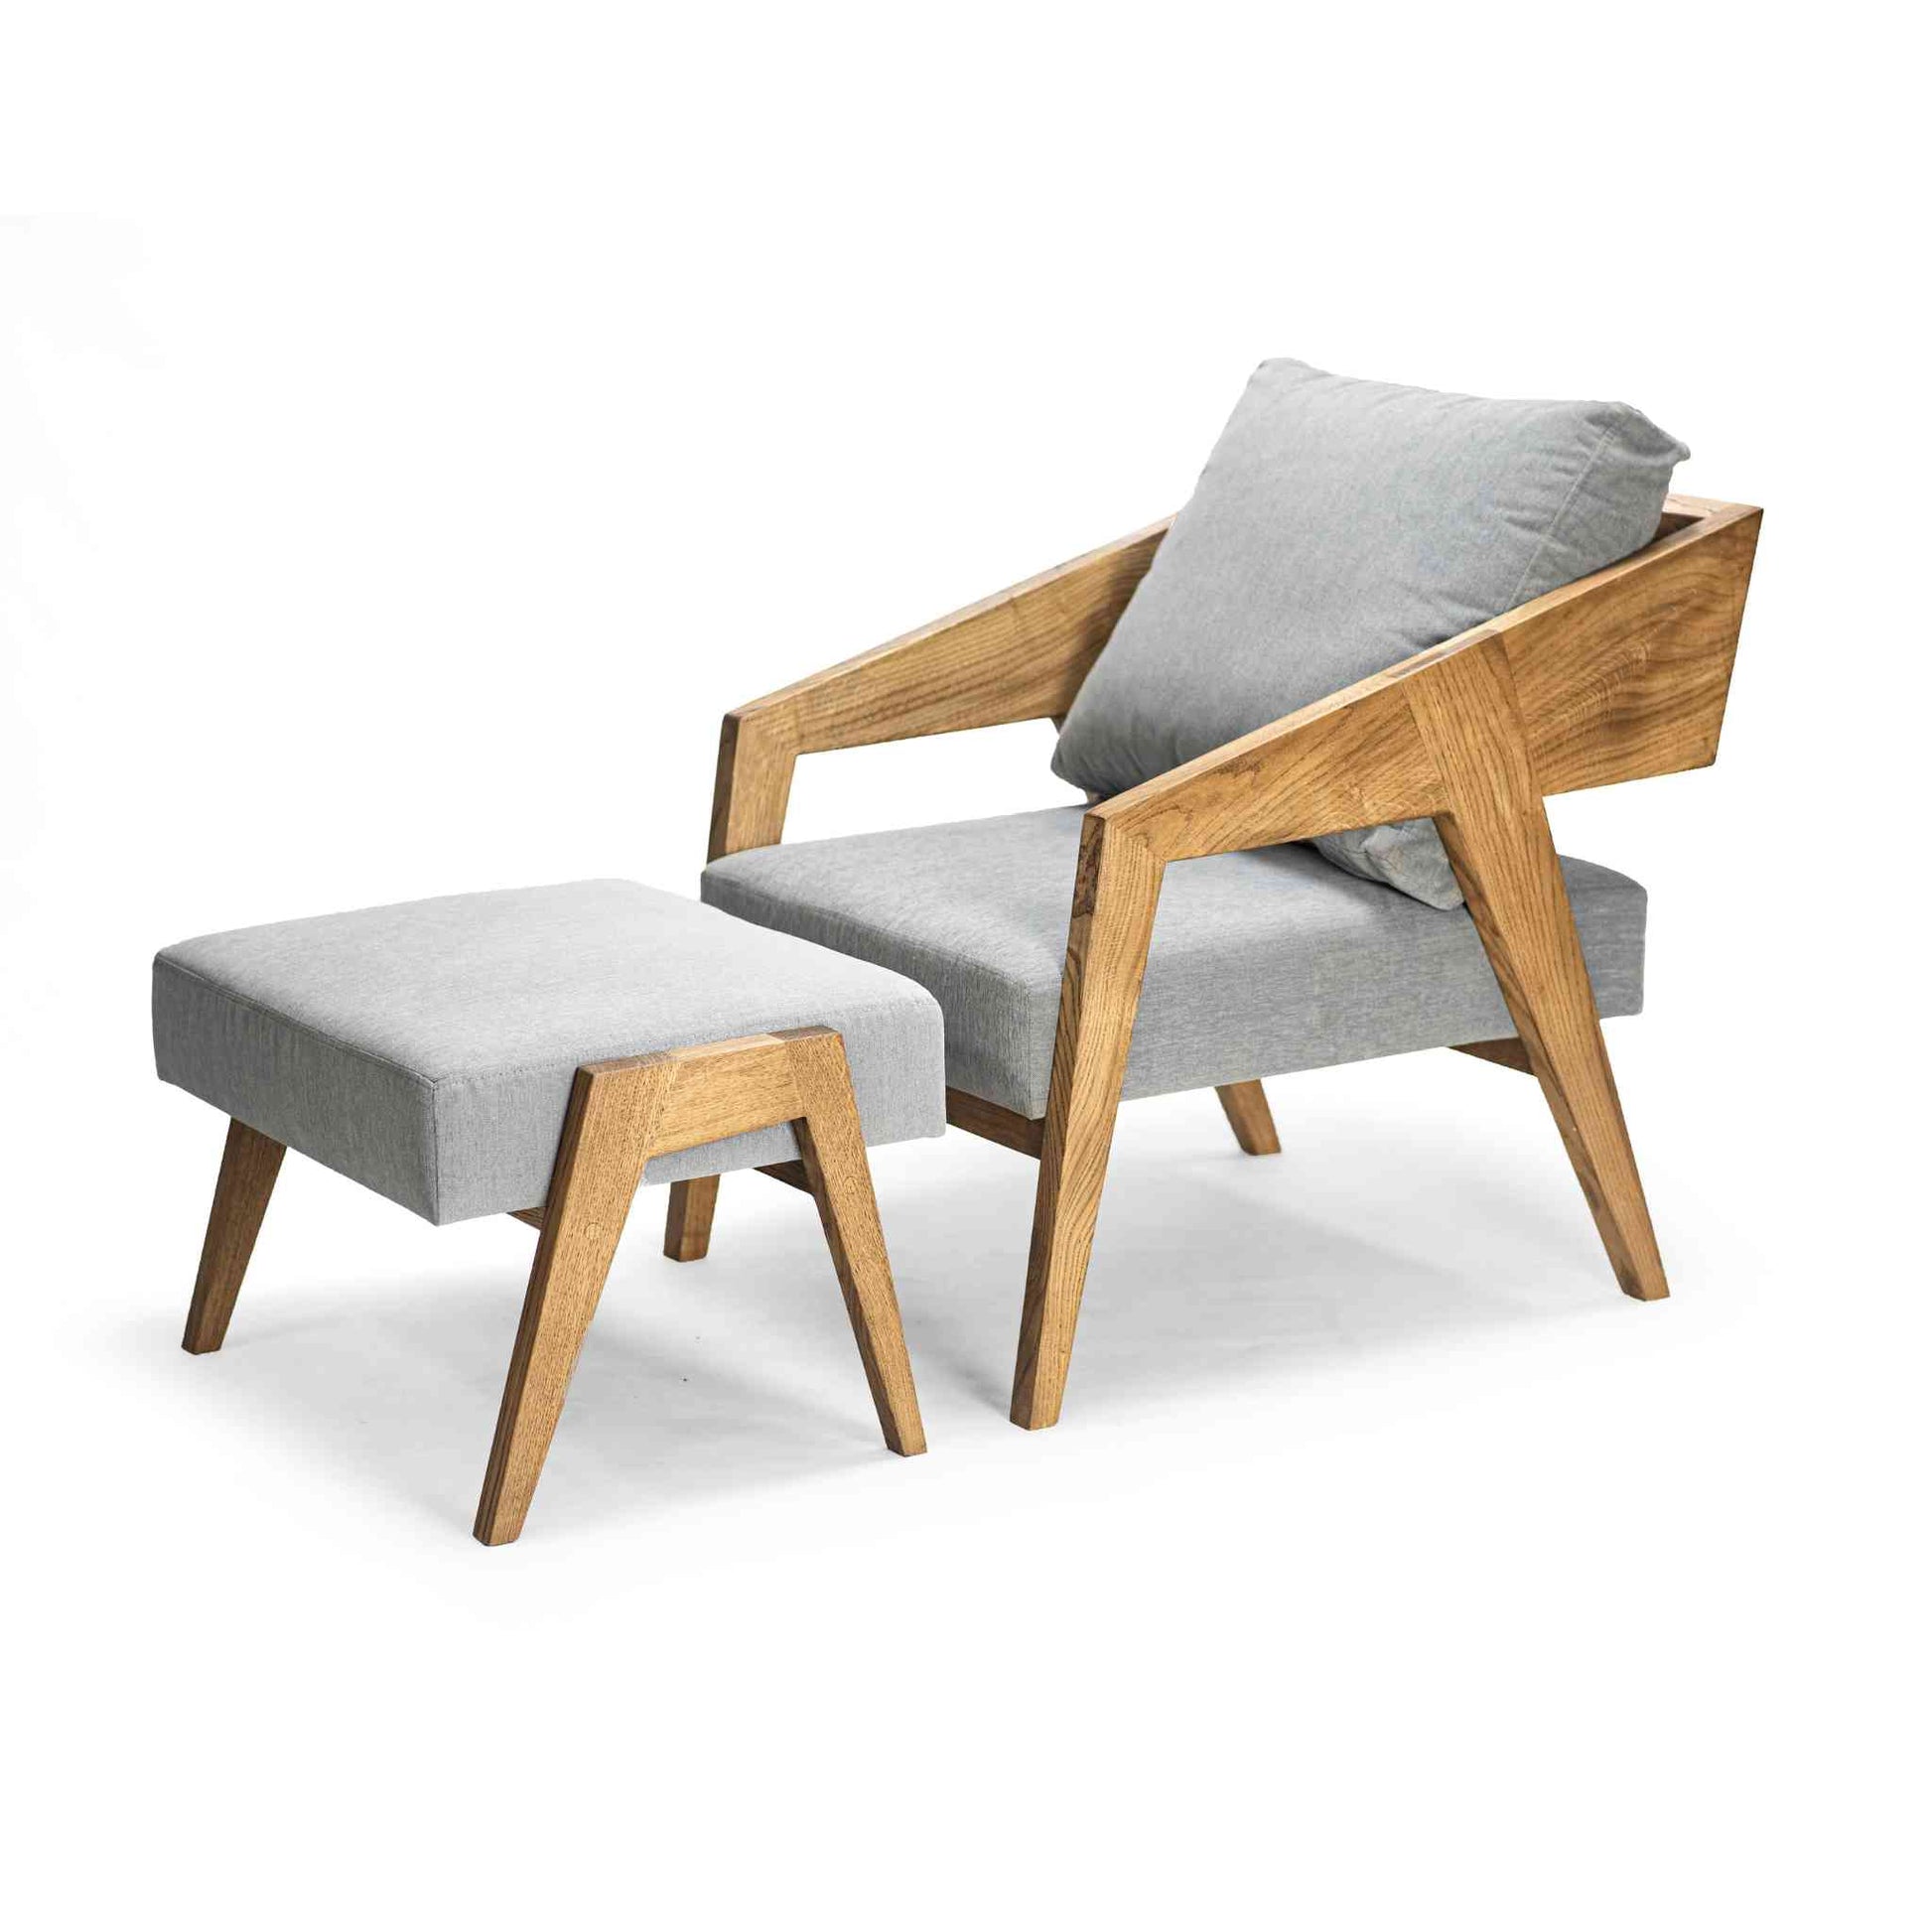 ÉTAUDORÉ Parsenn Armchair and Footrest in solid oak wood with high quality light ash gray color upholstery